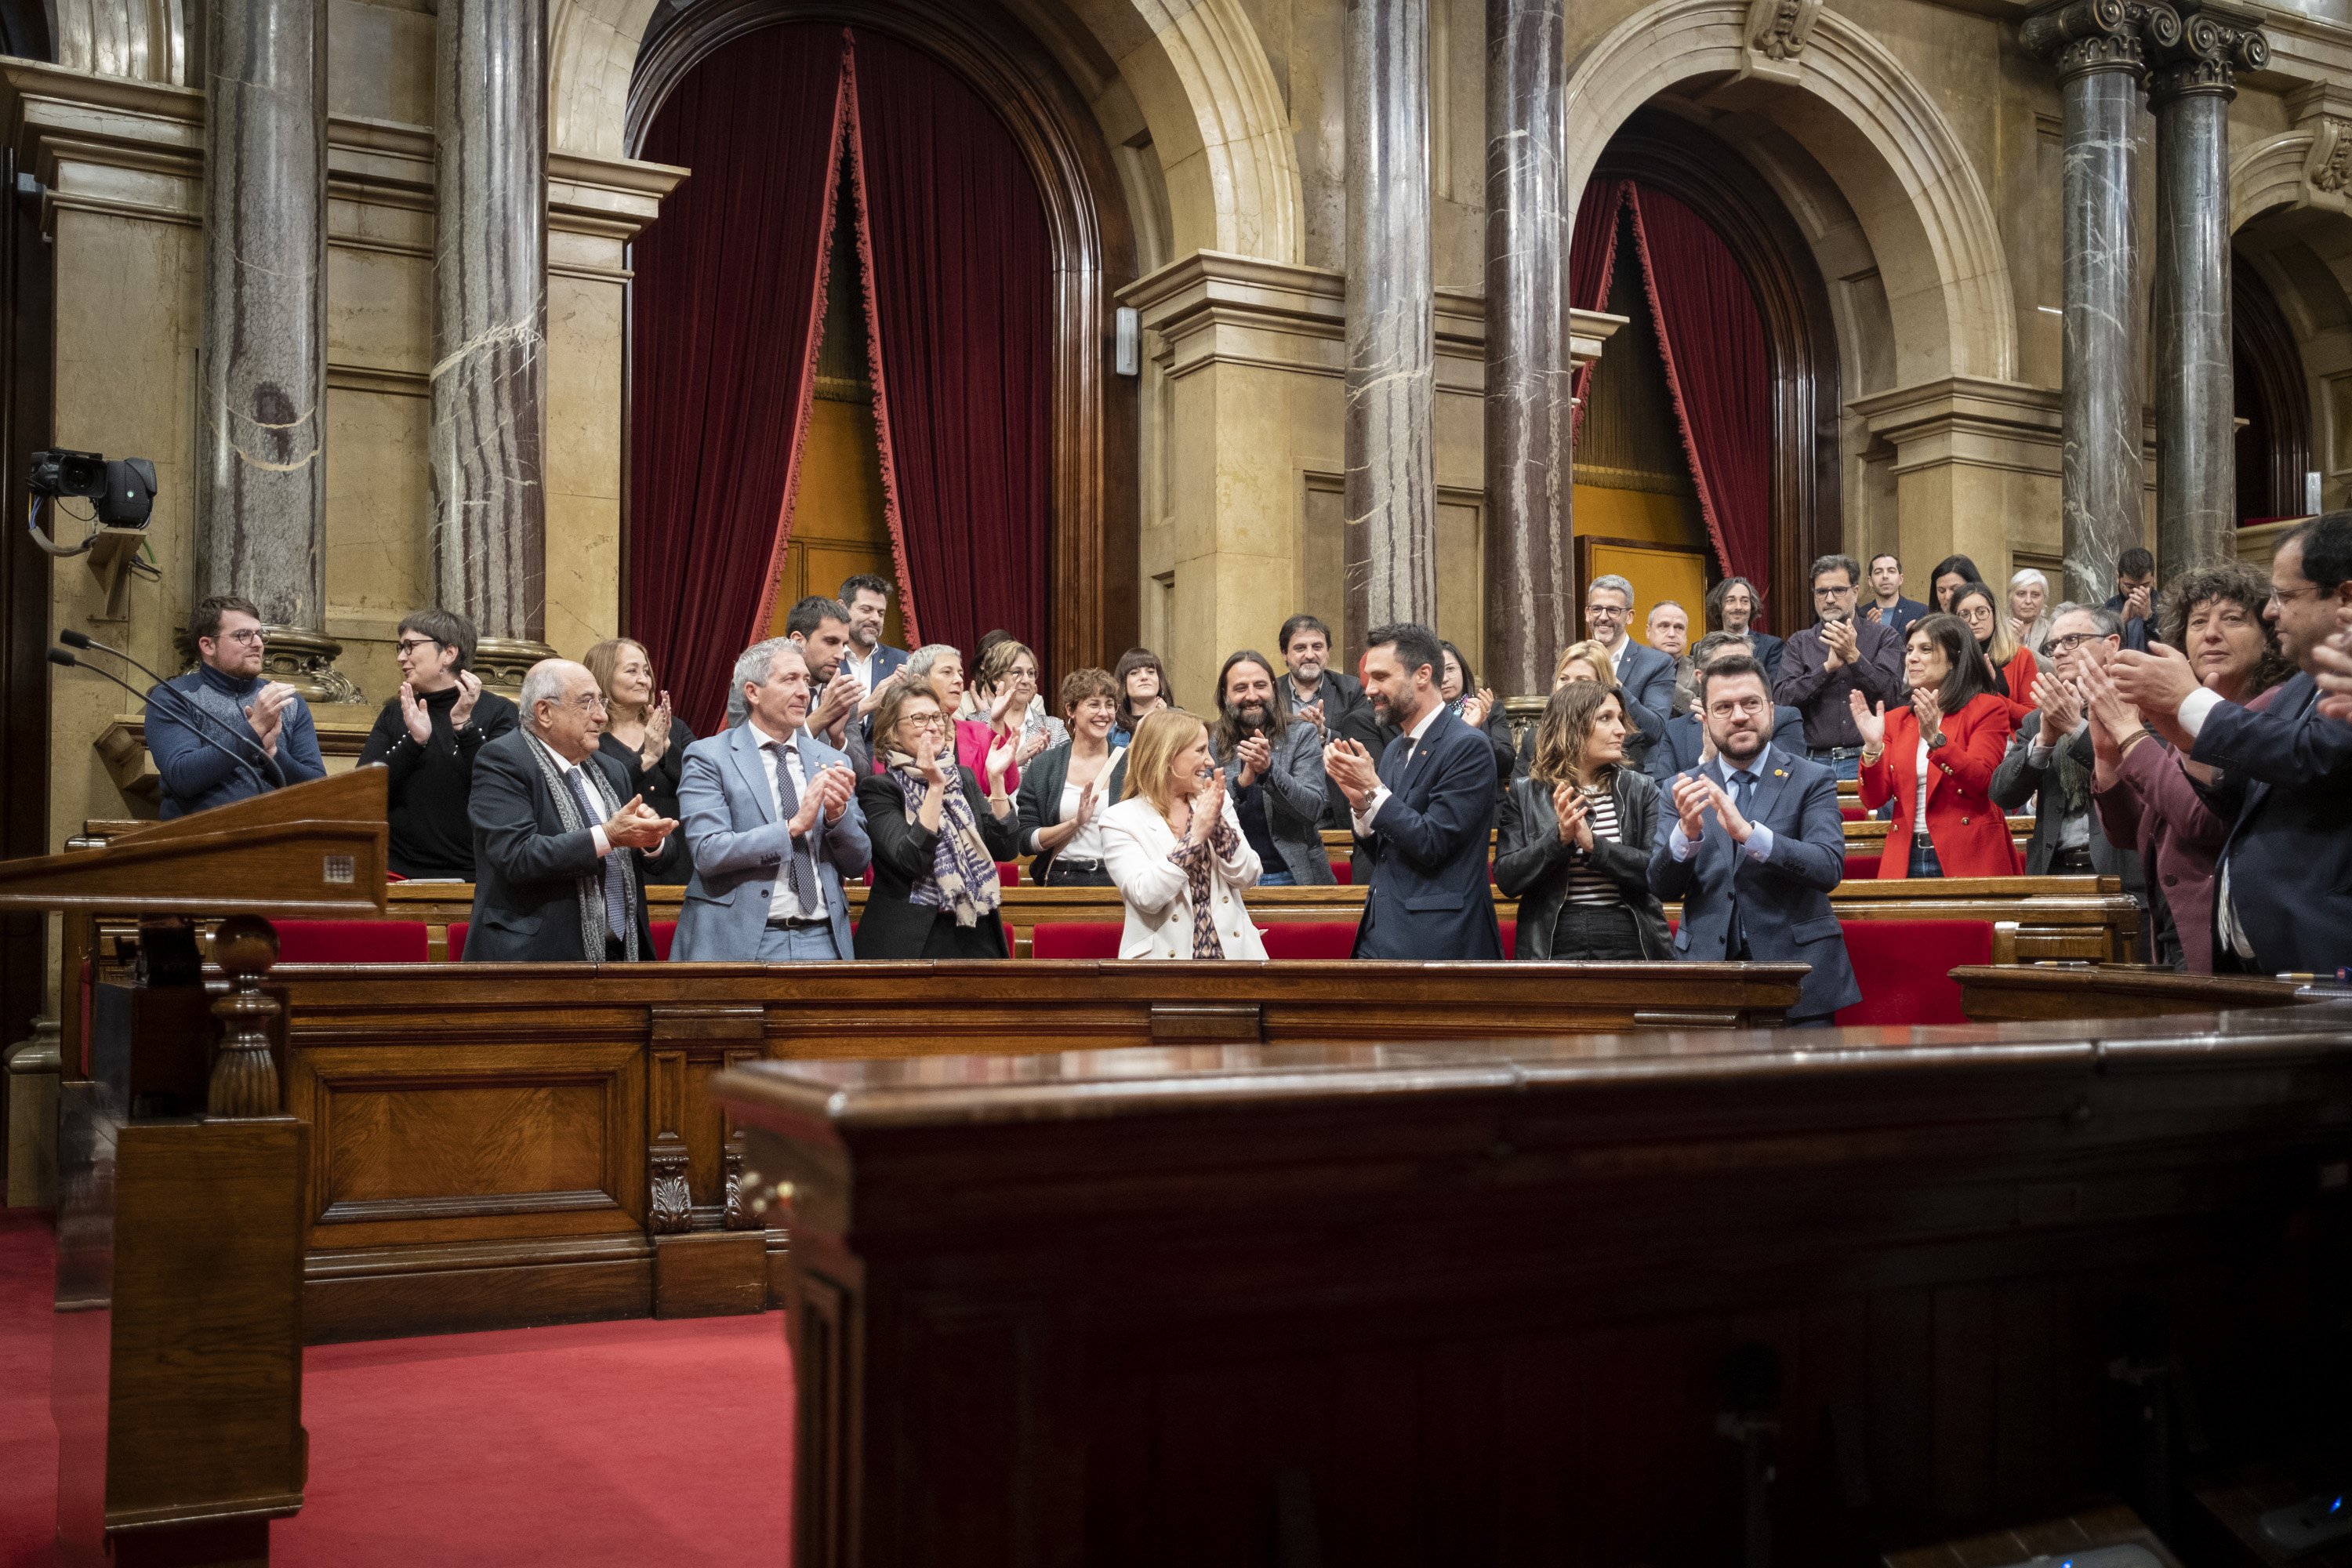 Parliament praises the citizens and Mossos, and calls to end violent extremism